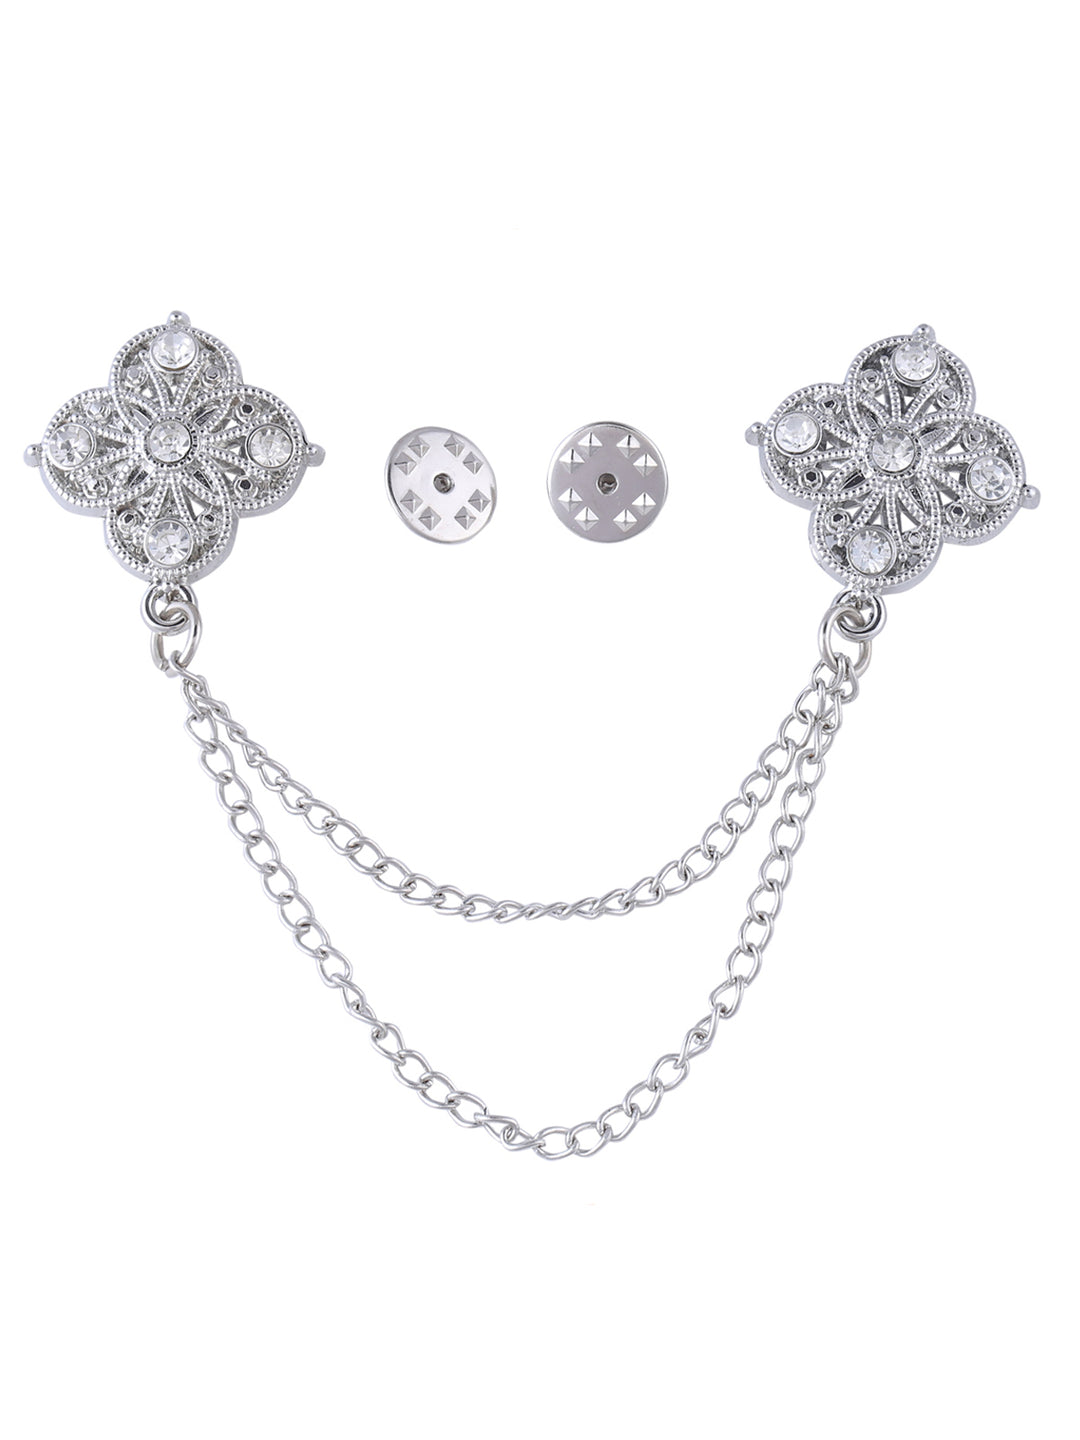 Traditional Double Chain Hanging Flower Brooch in Silver Colour